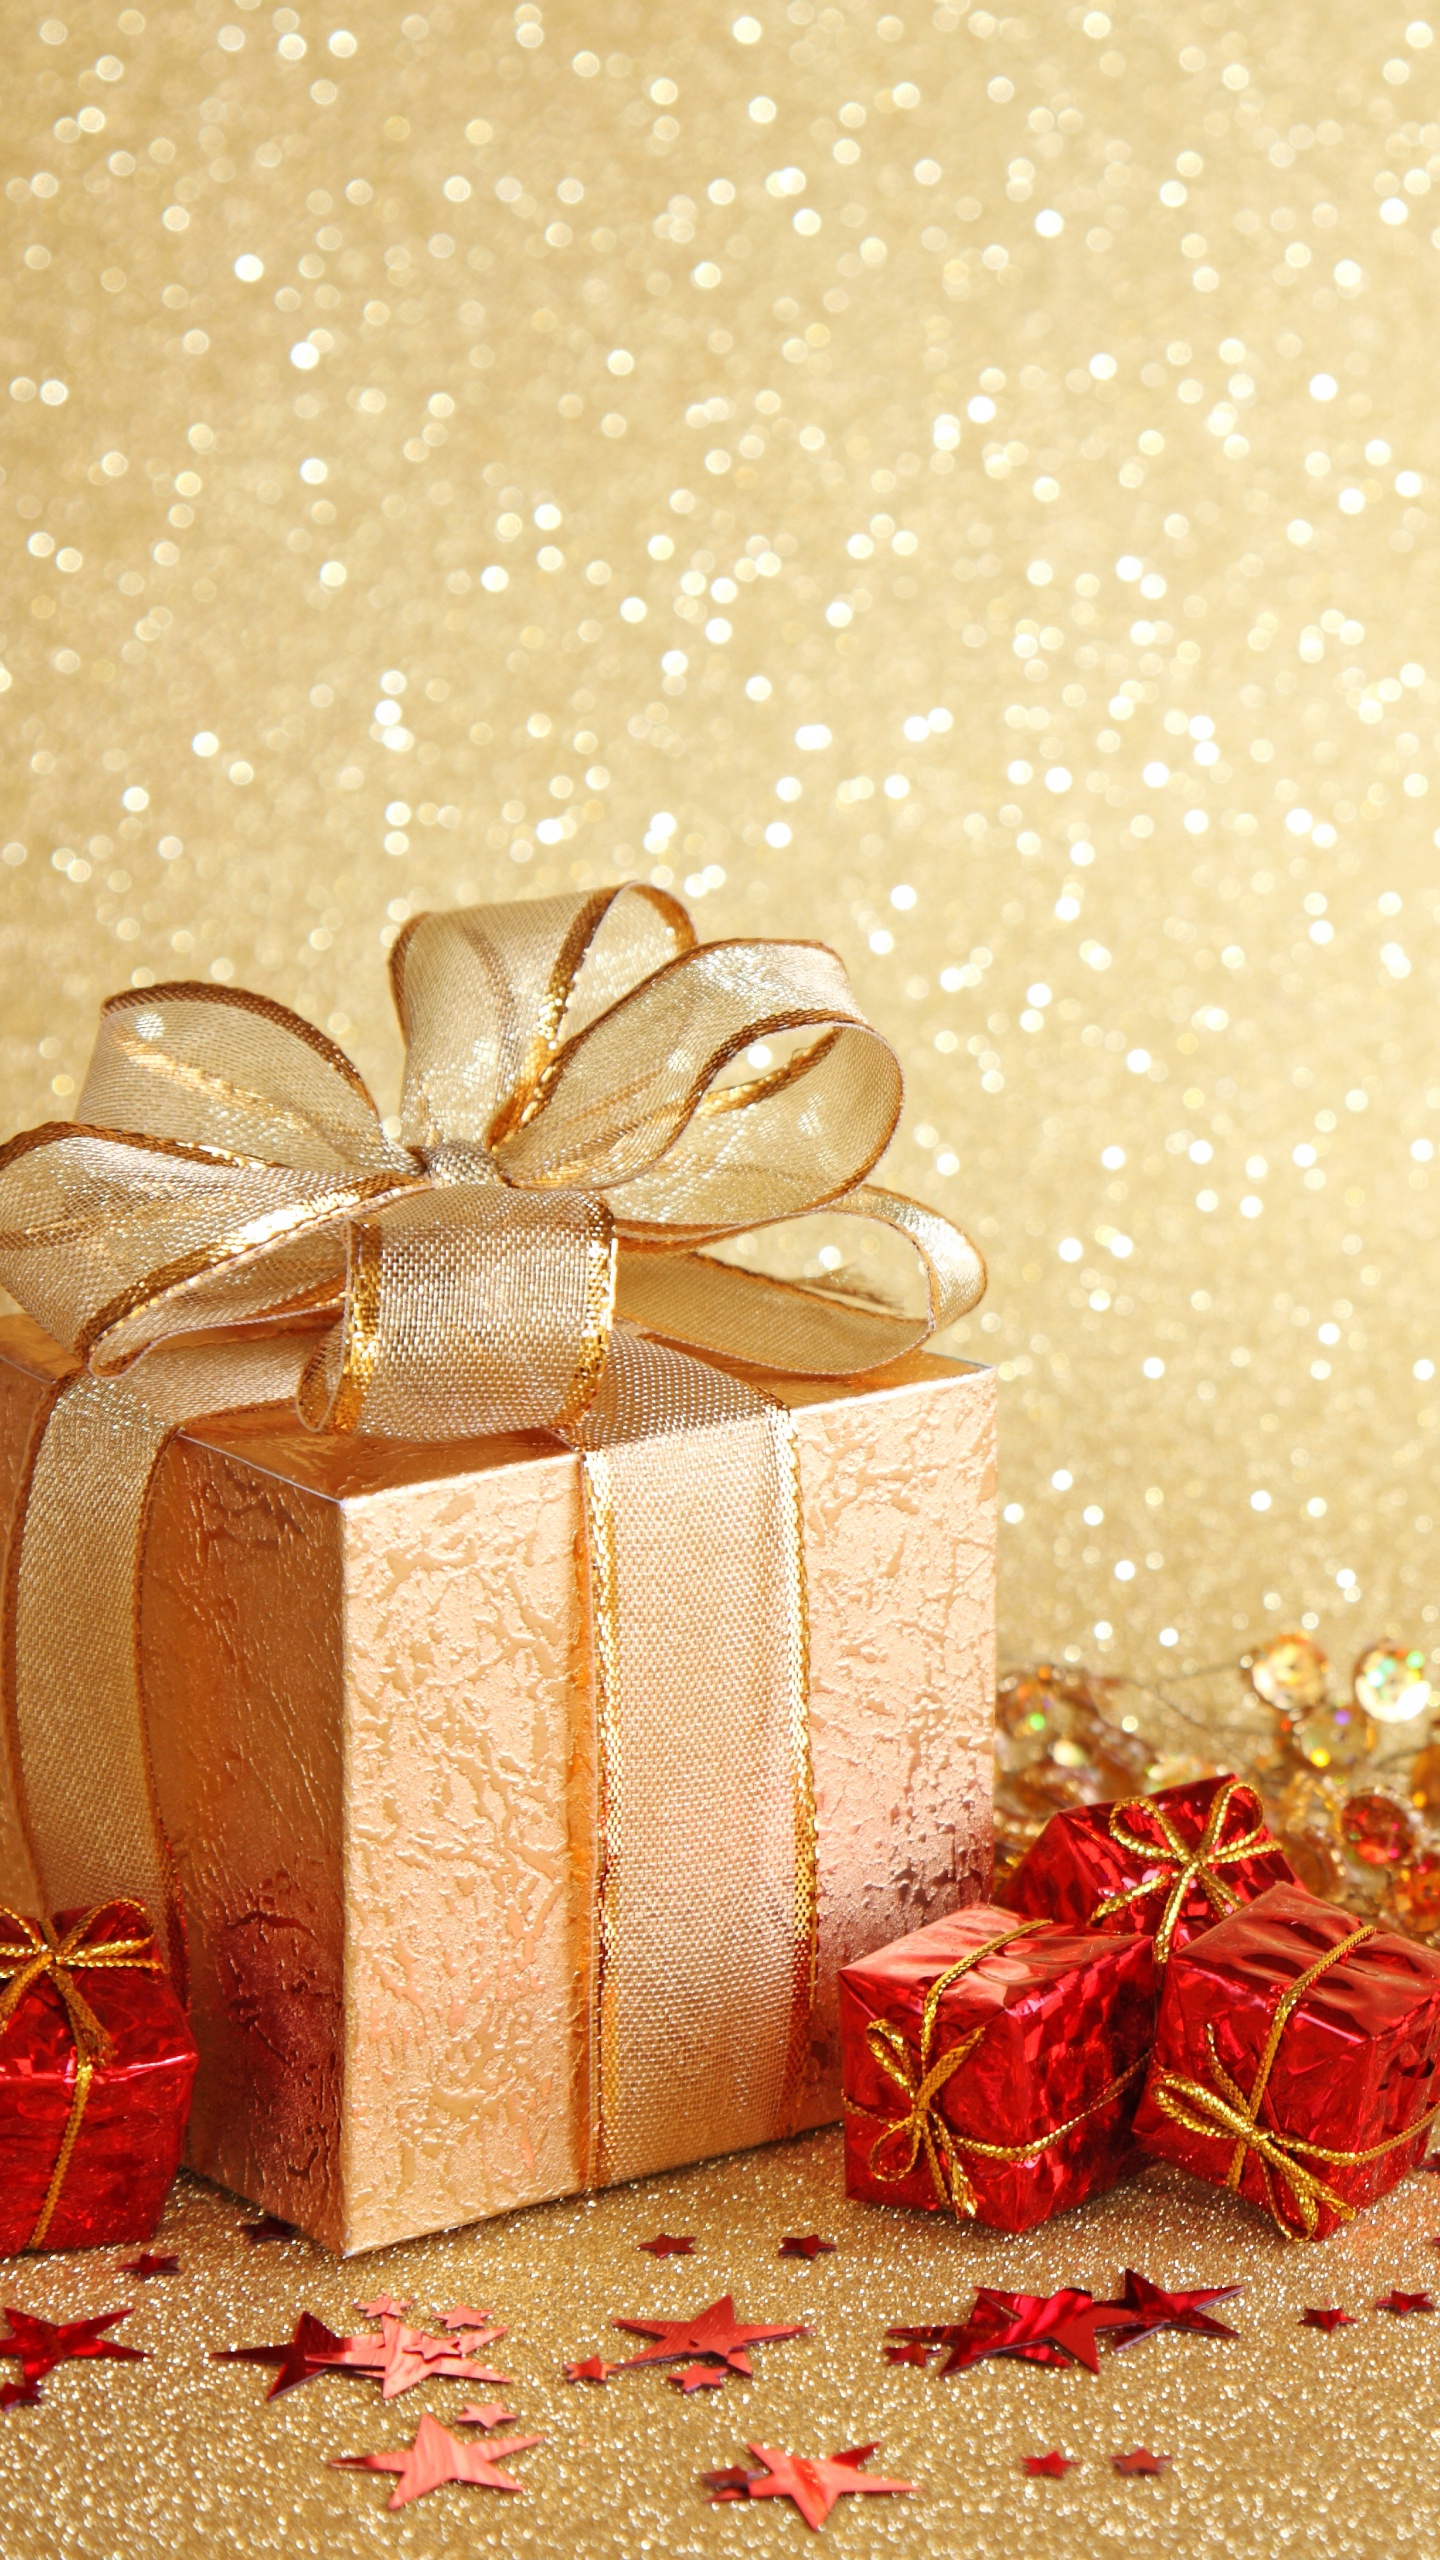 New Year, Happiness, Wish, Christmas Day, Present. Wallpaper in 1440x2560 Resolution